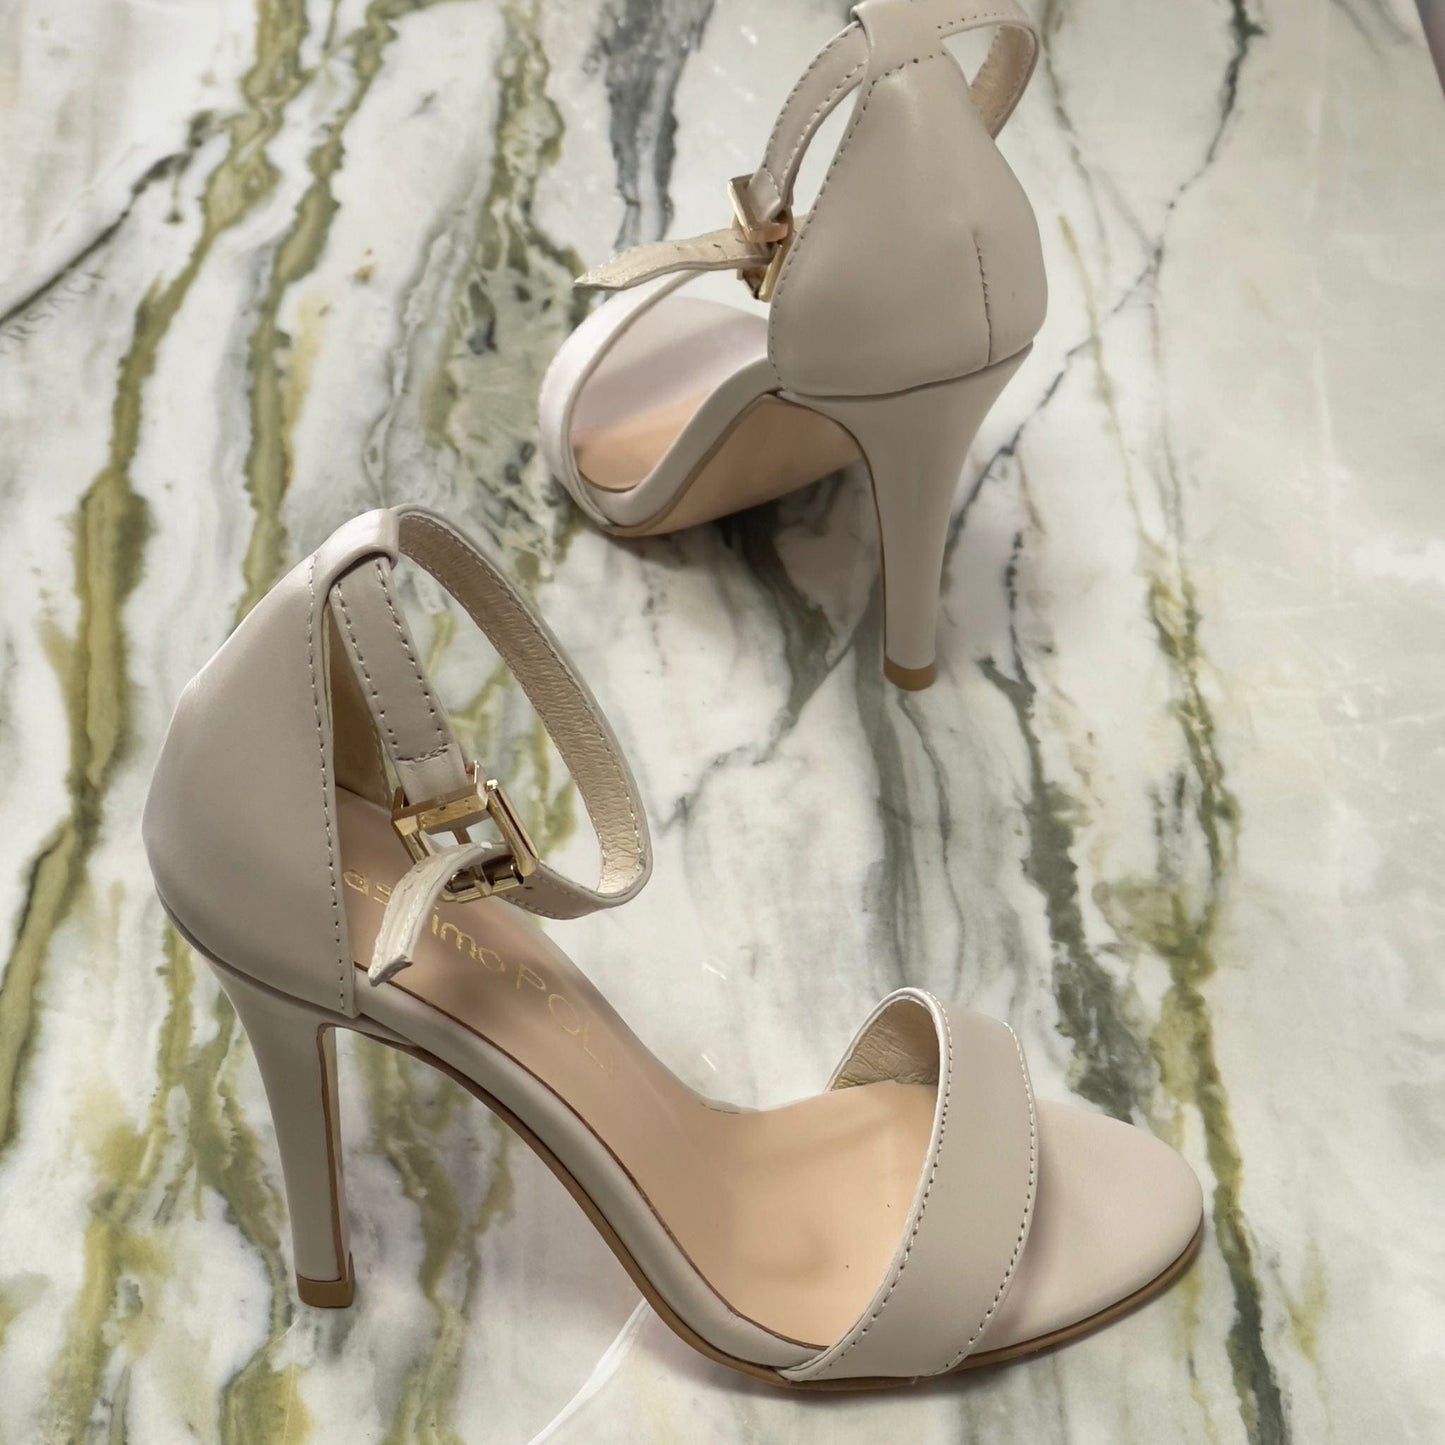 Small size ankle strap heeled sandals in nude leather